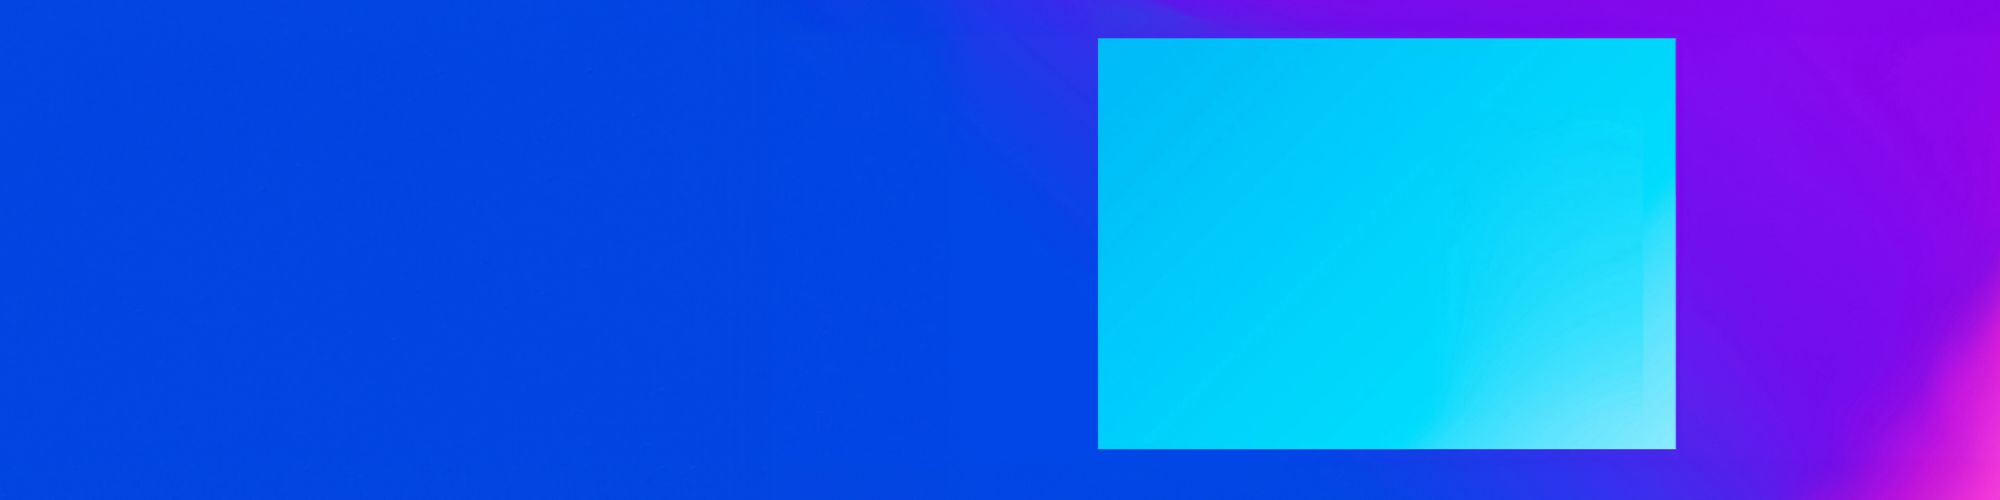 Light blue rectangle with blue and purple gradient background